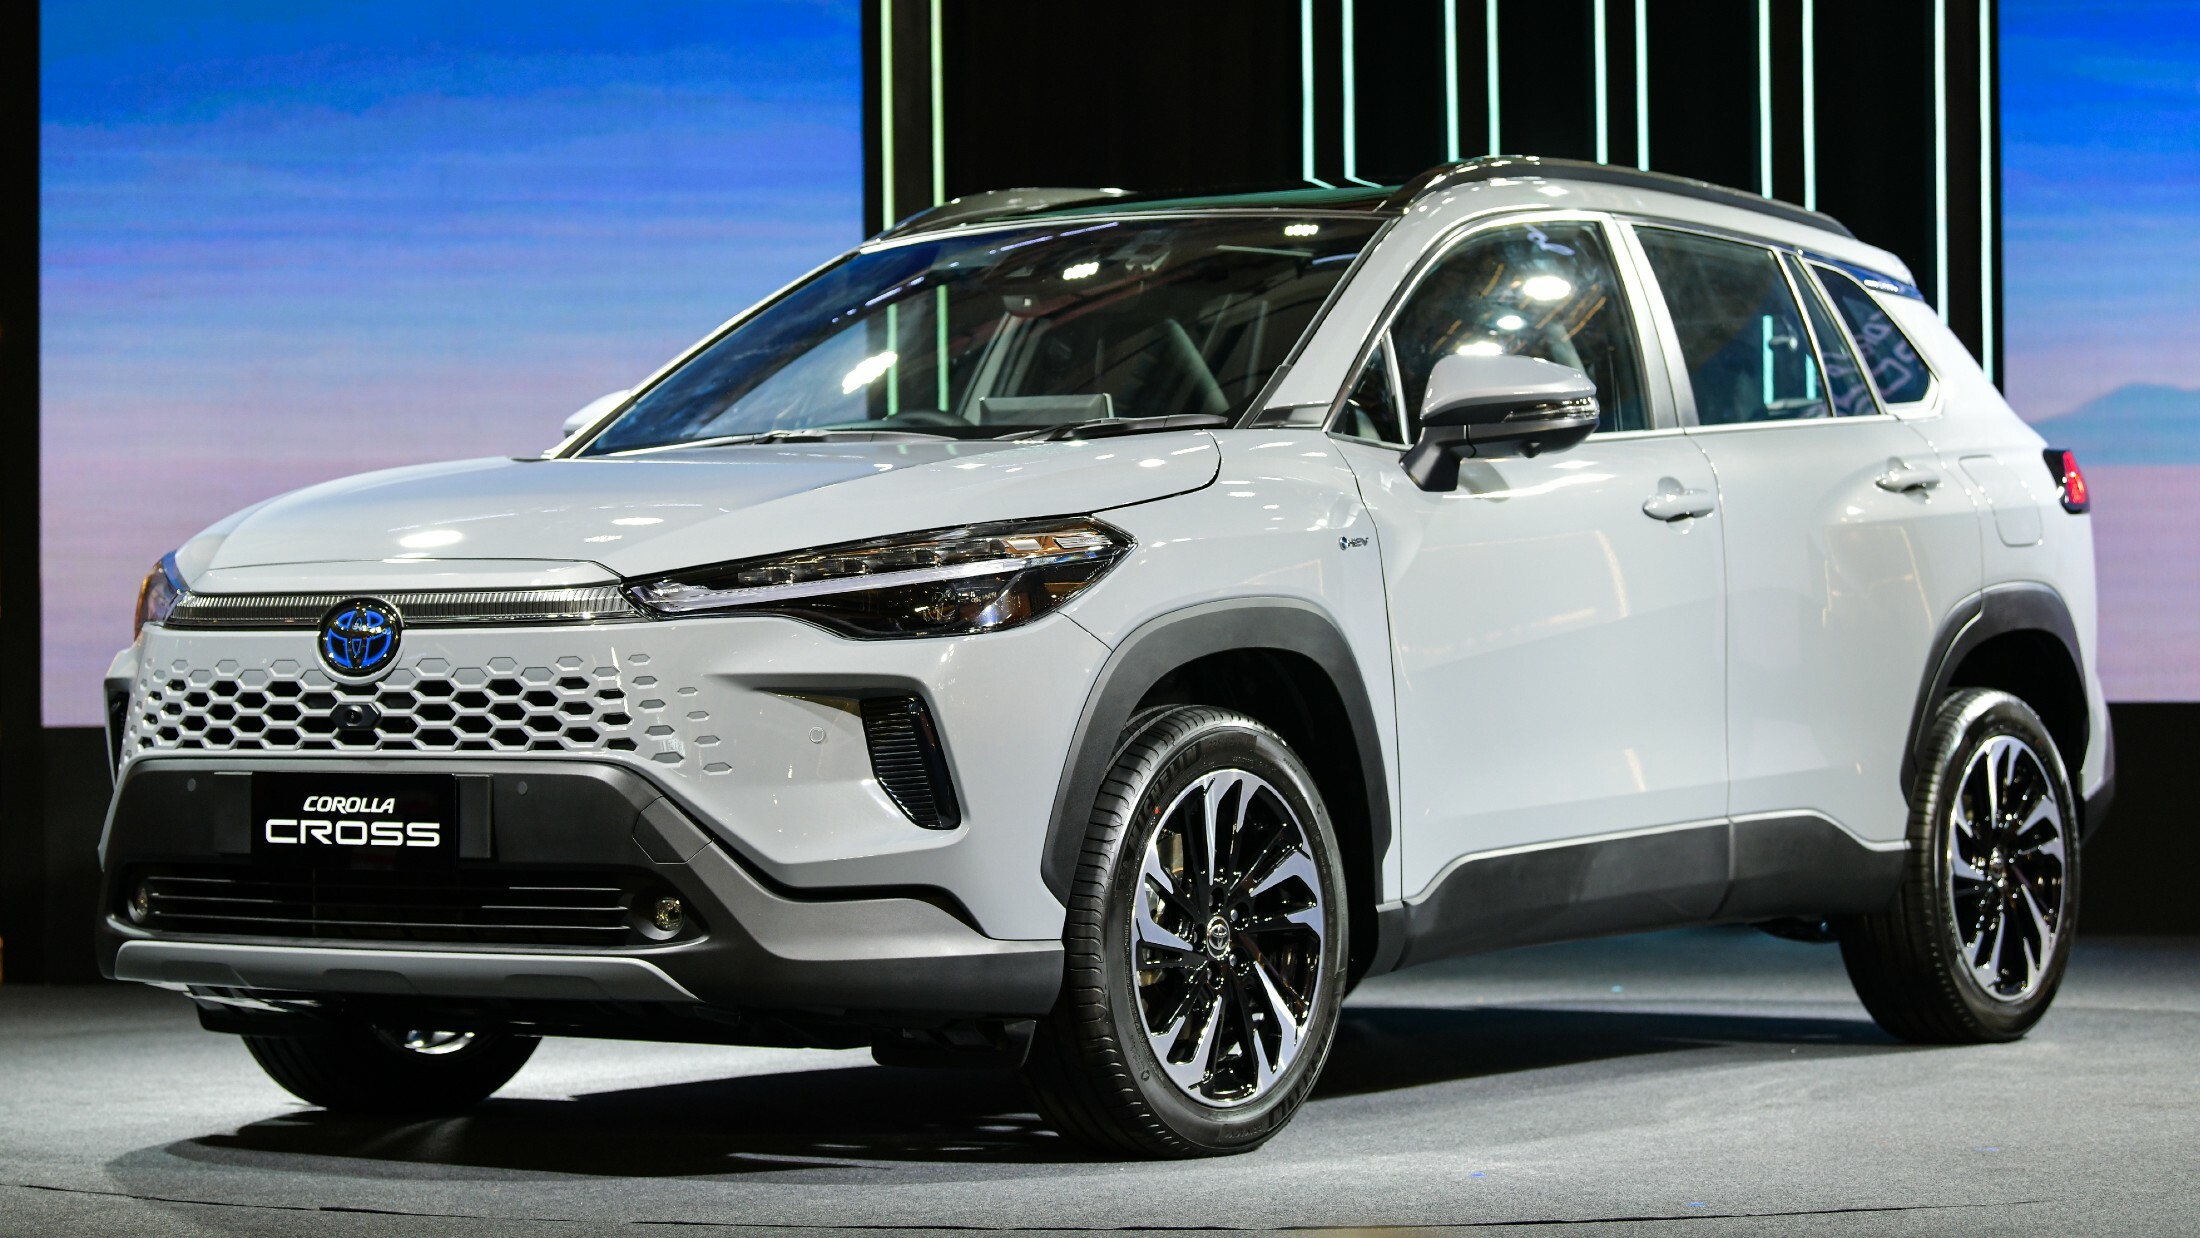 Toyota To Reportedly Launch Corolla Cross SUV In The U.S. Market